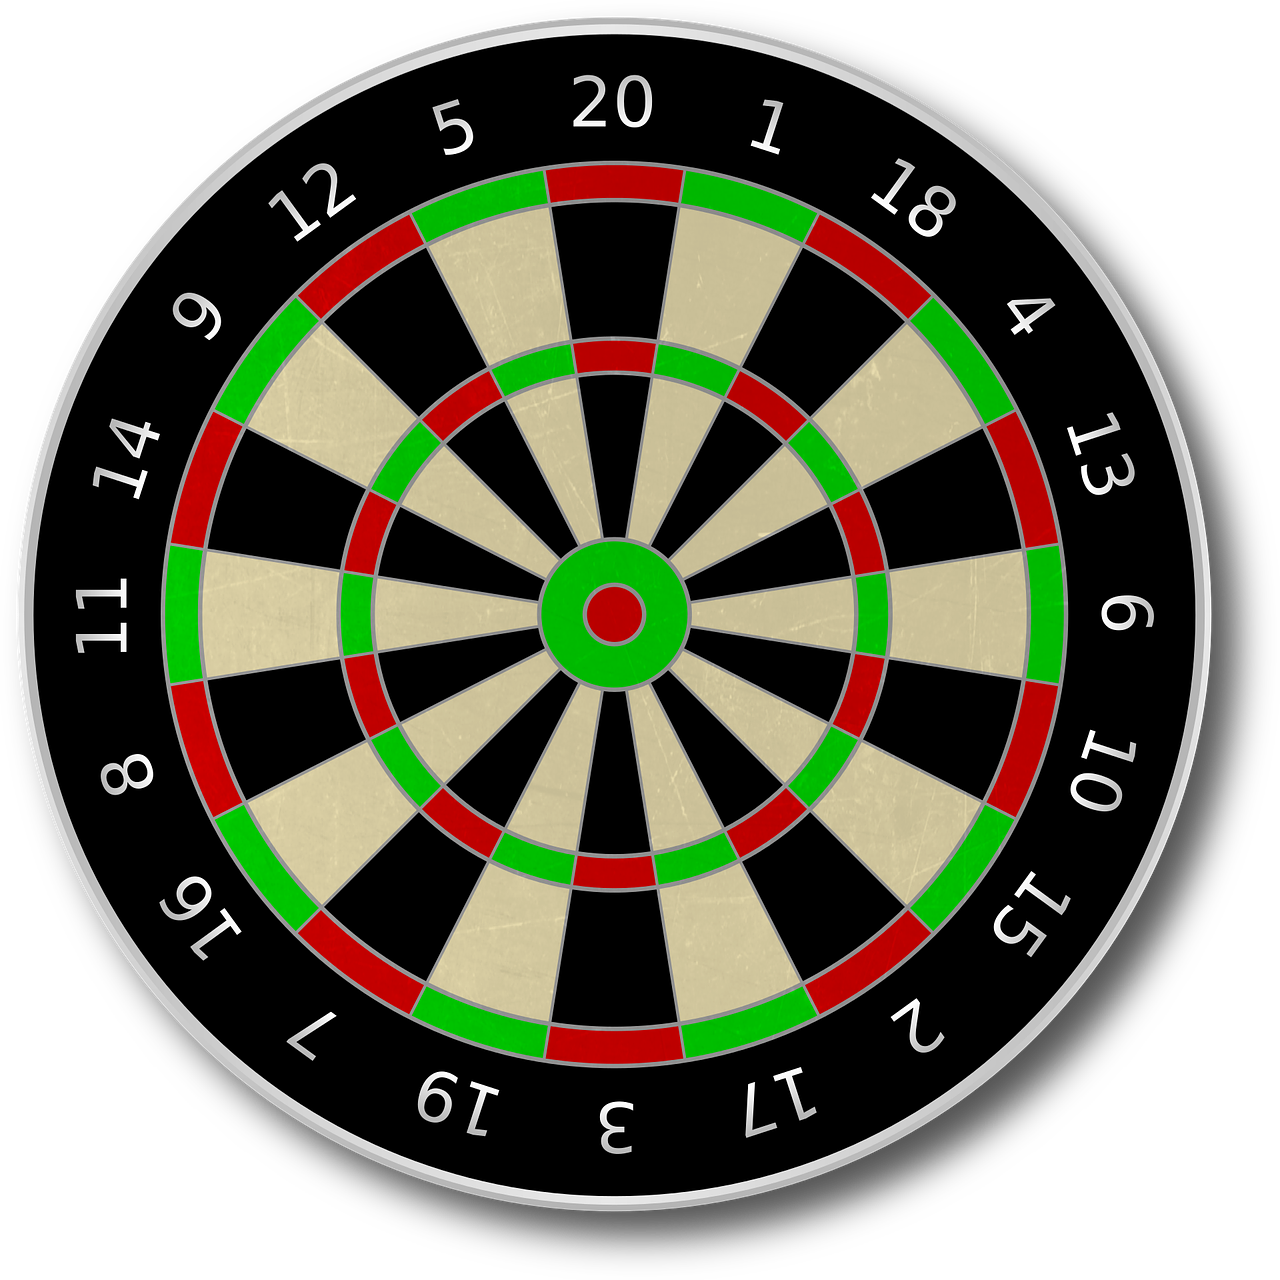 In What Way Does Game of Darts Help You